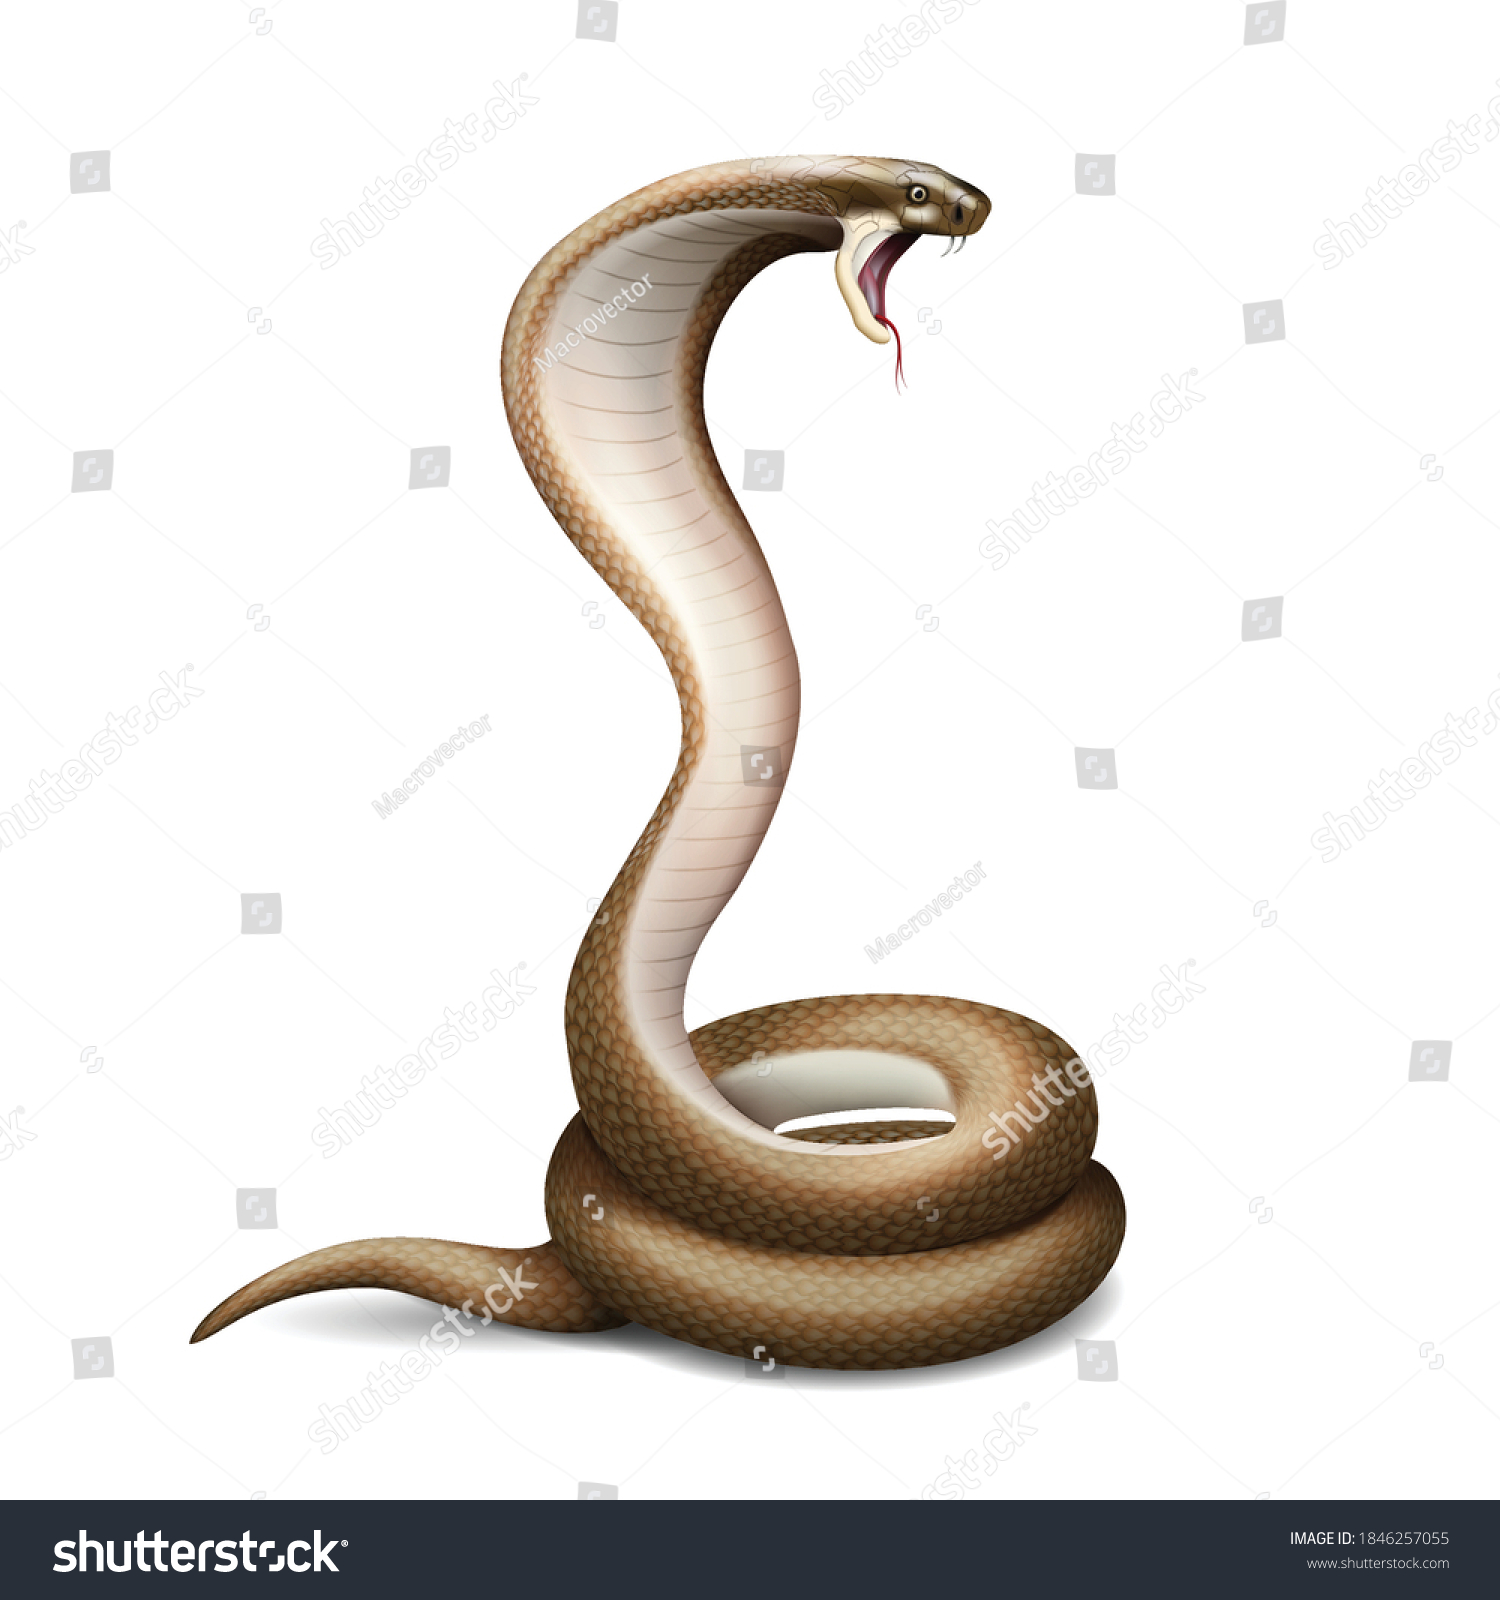 SVG of Realistic snake composition with isolated image of hissing cobra with shadow on blank background vector illustration svg